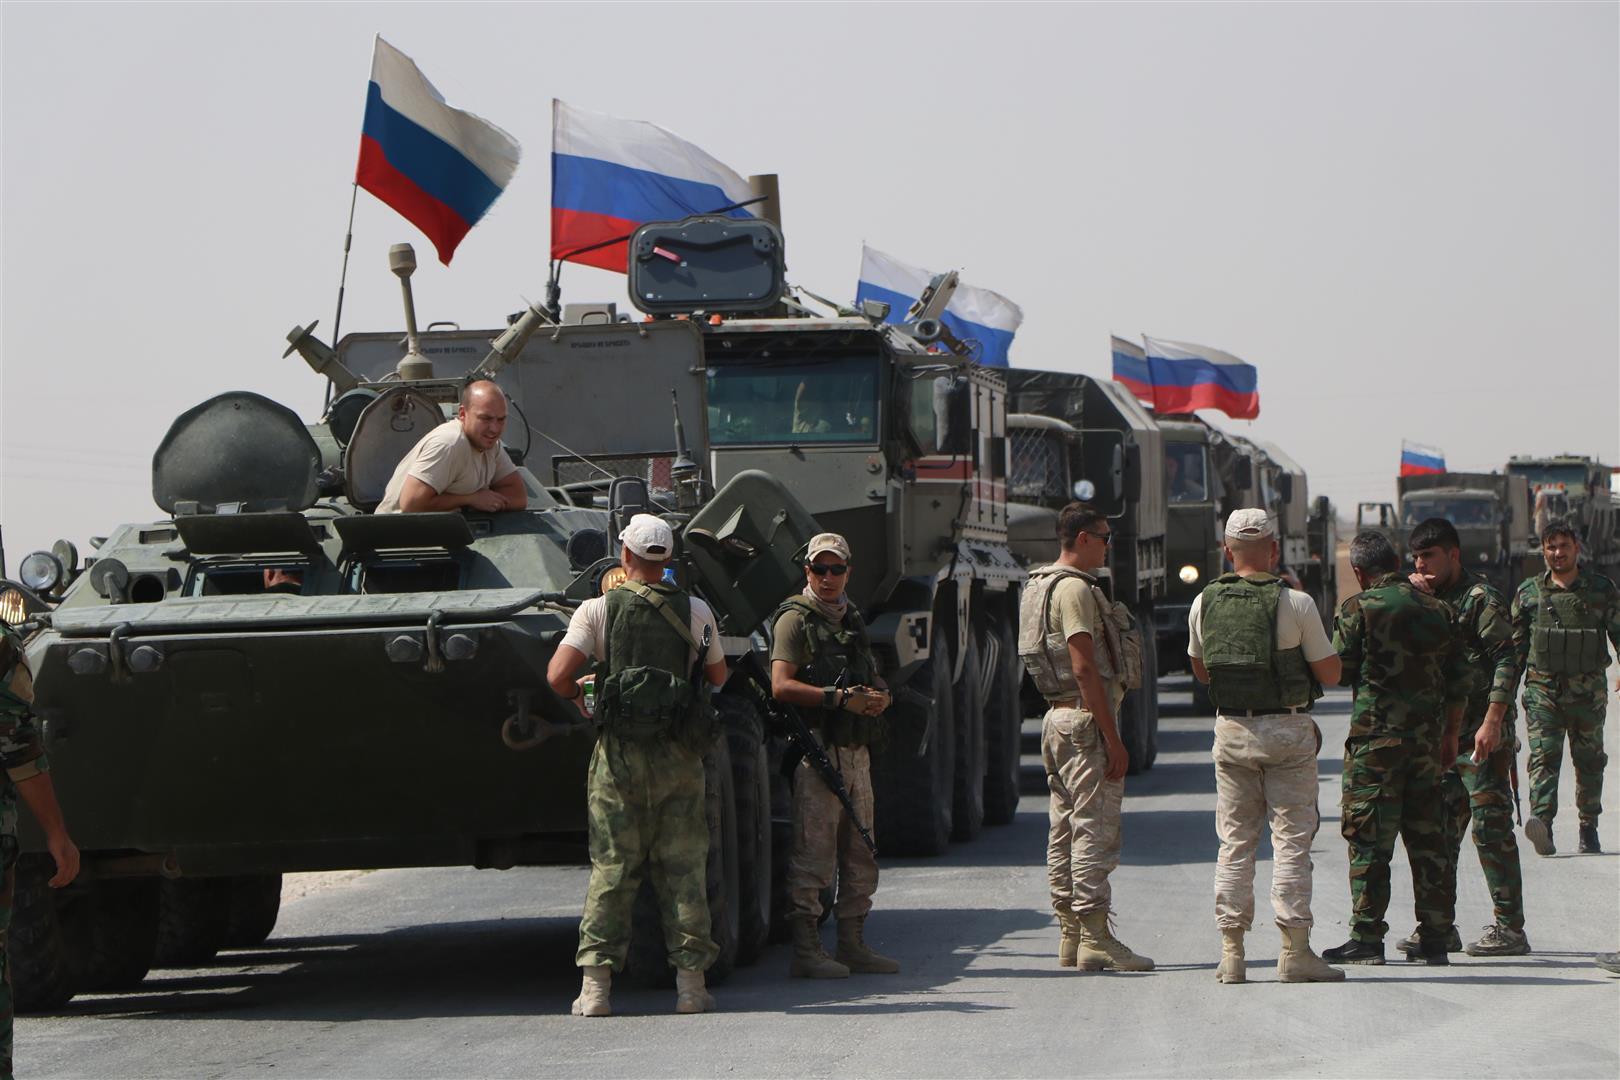 Russian forces bring in new military reinforcement to Kamisli|Russian forces bring in new military reinforcement to Kamisli|09092020-Syria_BattlespaceV2|20200917-Syria_Russia-1|20200917-Iran-to-Beirut-1|20200917-Jubail-to-Beirut-1